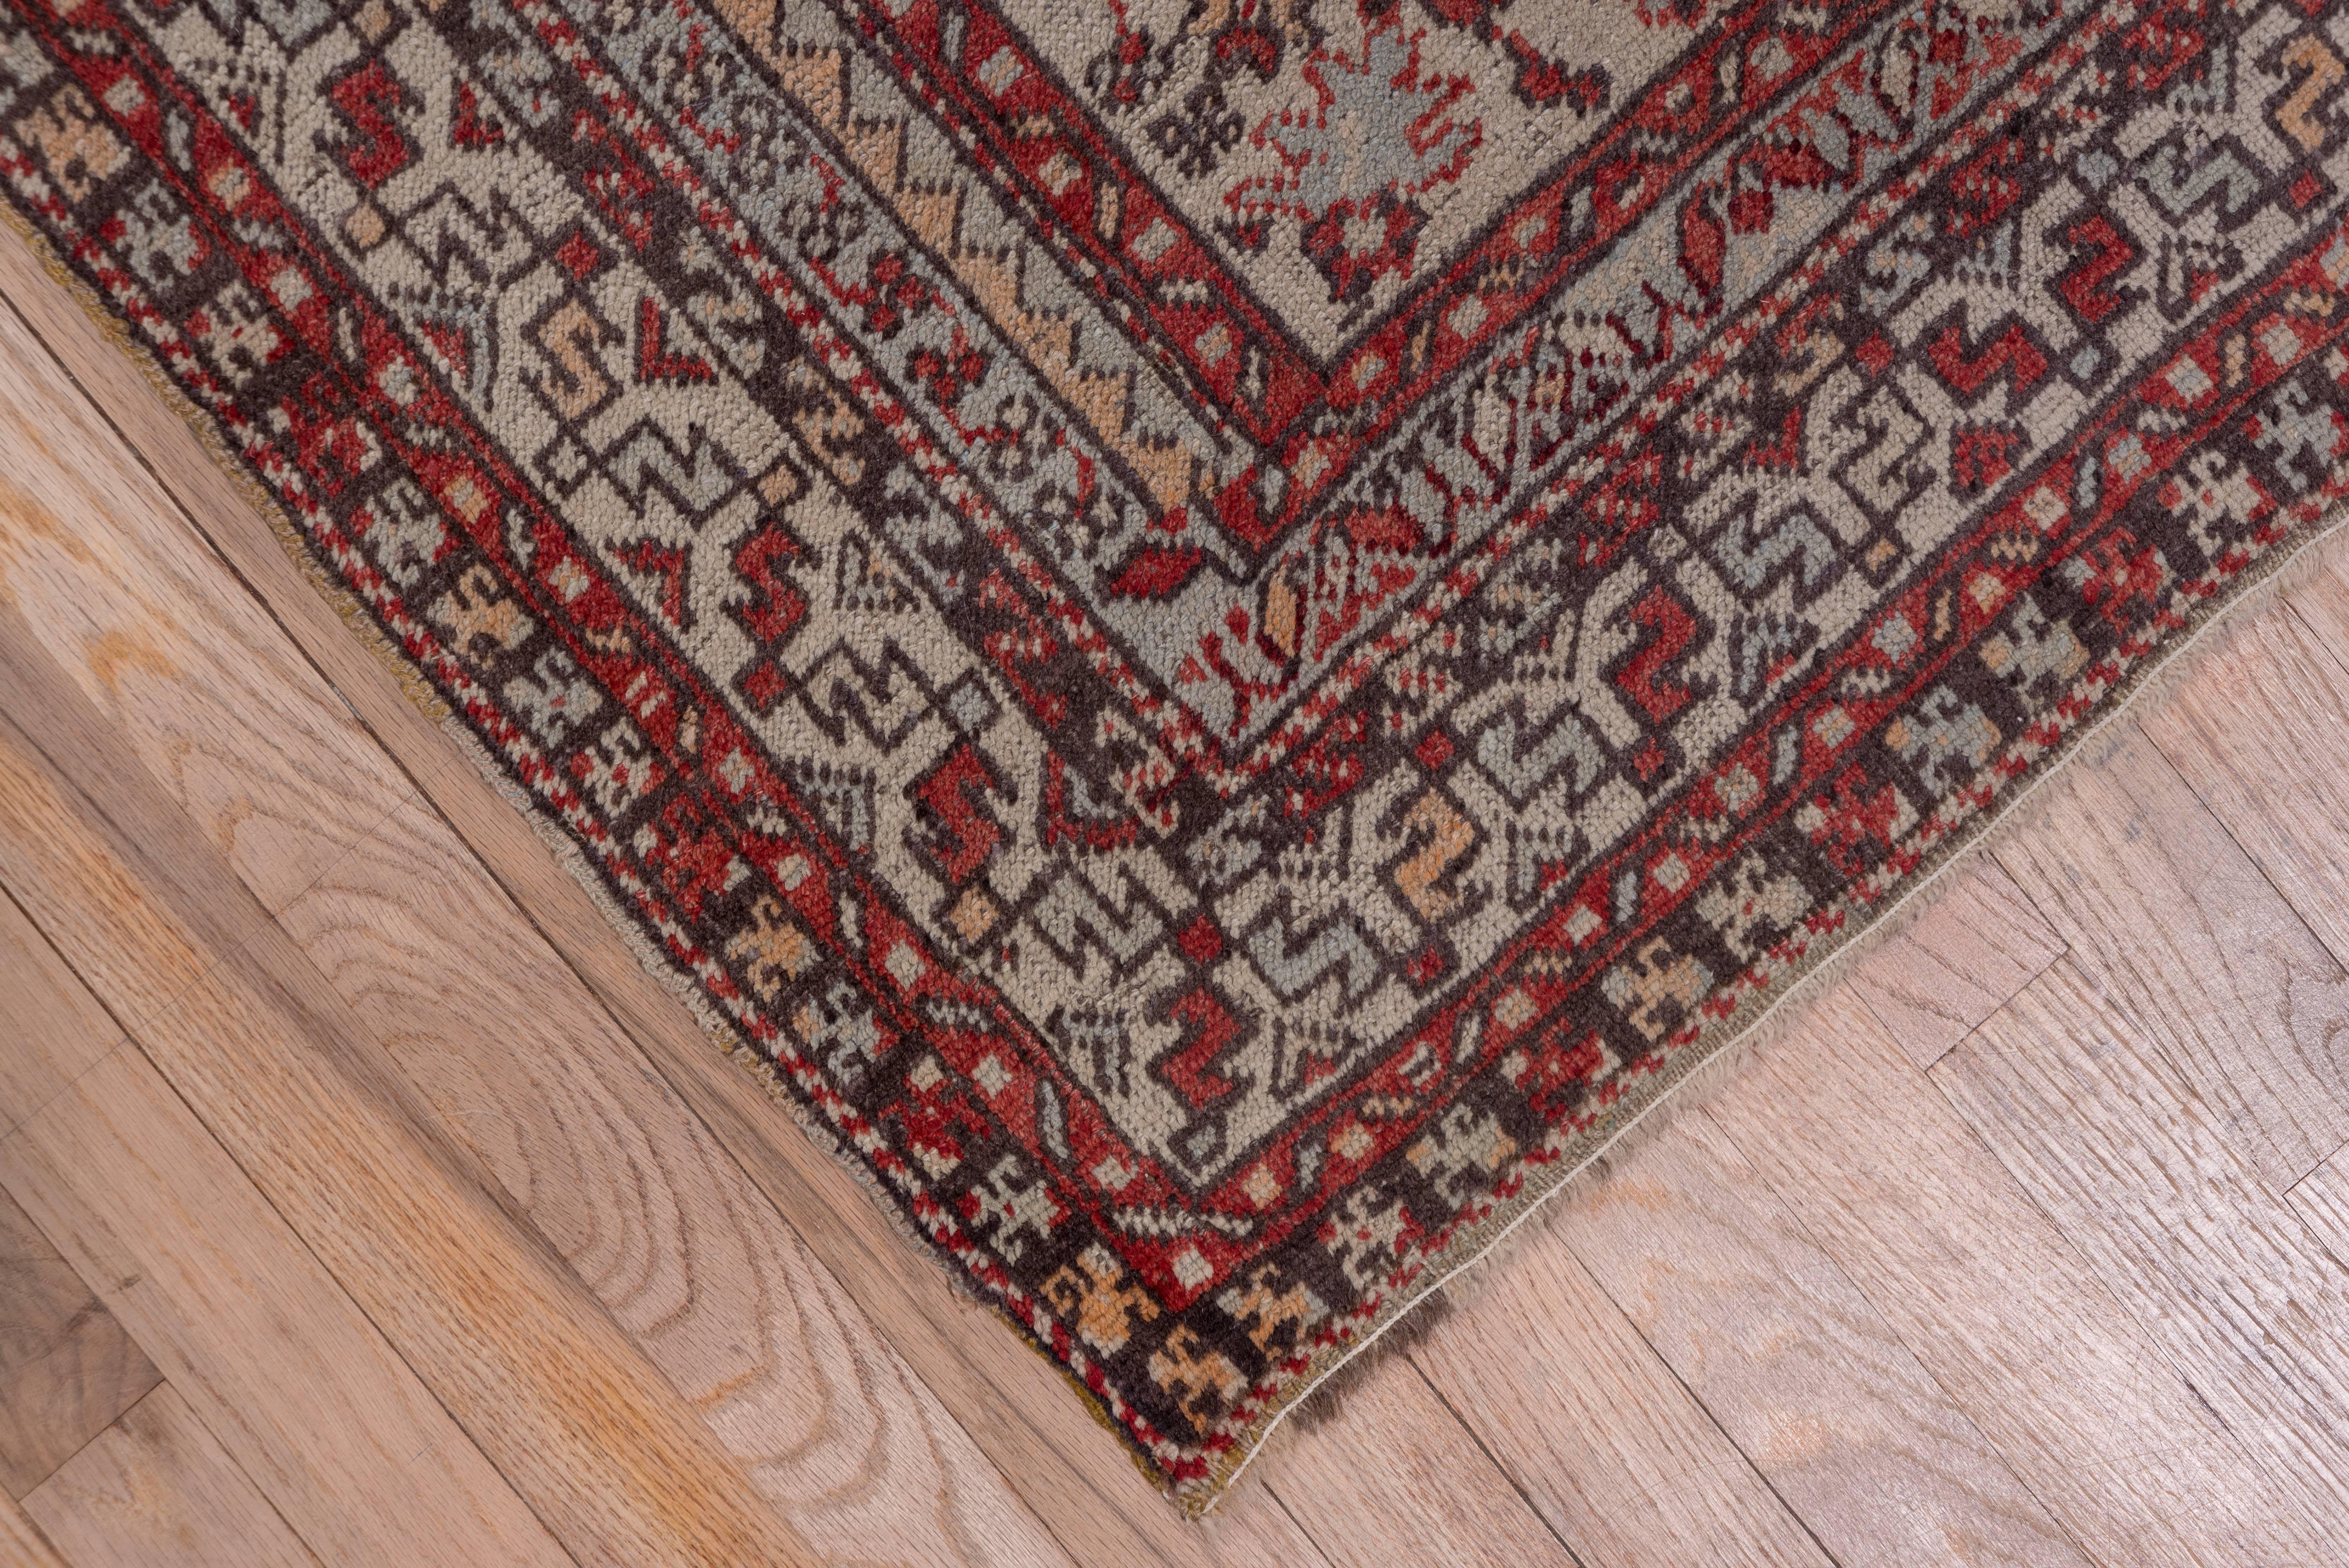 The field of this eastern Turkish runner is divided into three parts. Brown with a red medallion; One panel is red with gray and another is gray with tan. The ivory main border has a pattern of short, serrated diagonal leaves.